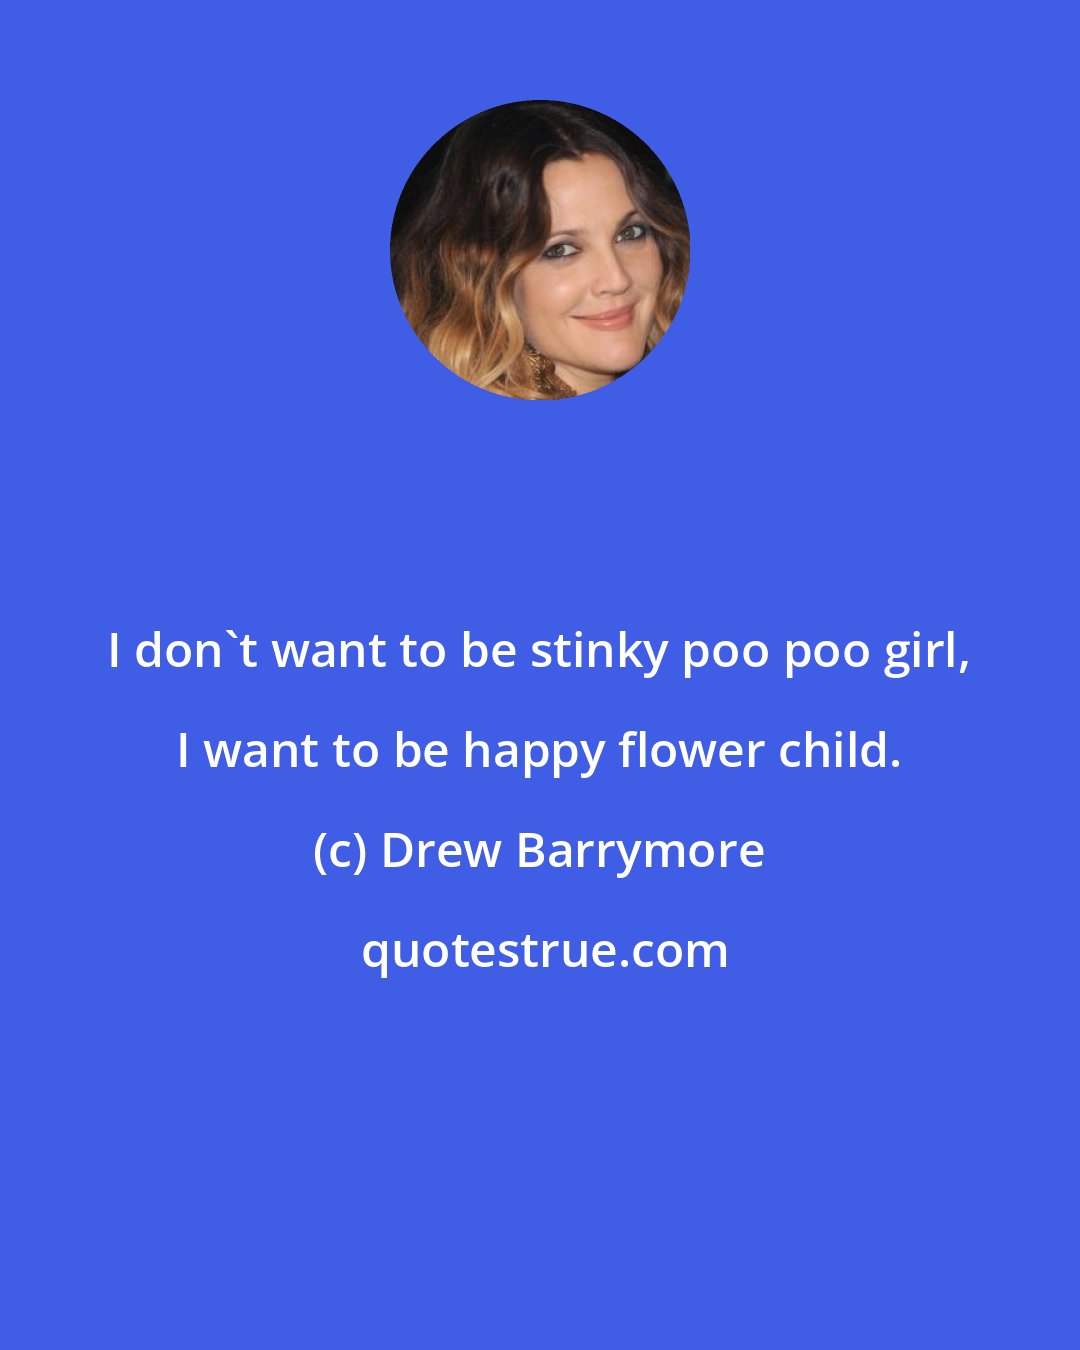 Drew Barrymore: I don't want to be stinky poo poo girl, I want to be happy flower child.